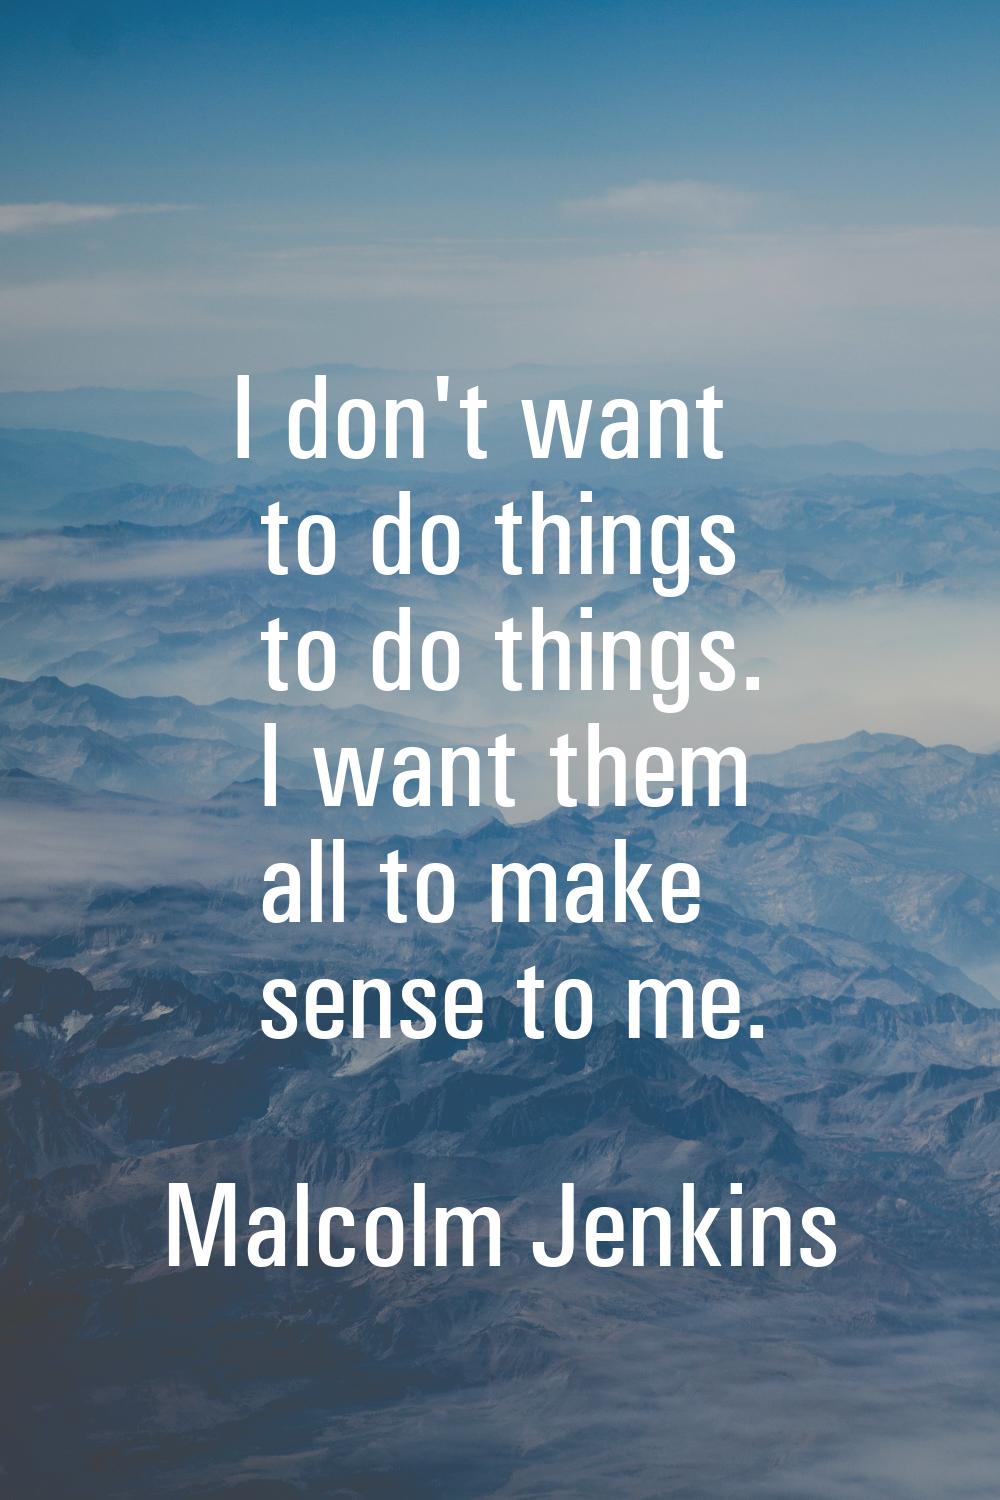 I don't want to do things to do things. I want them all to make sense to me.